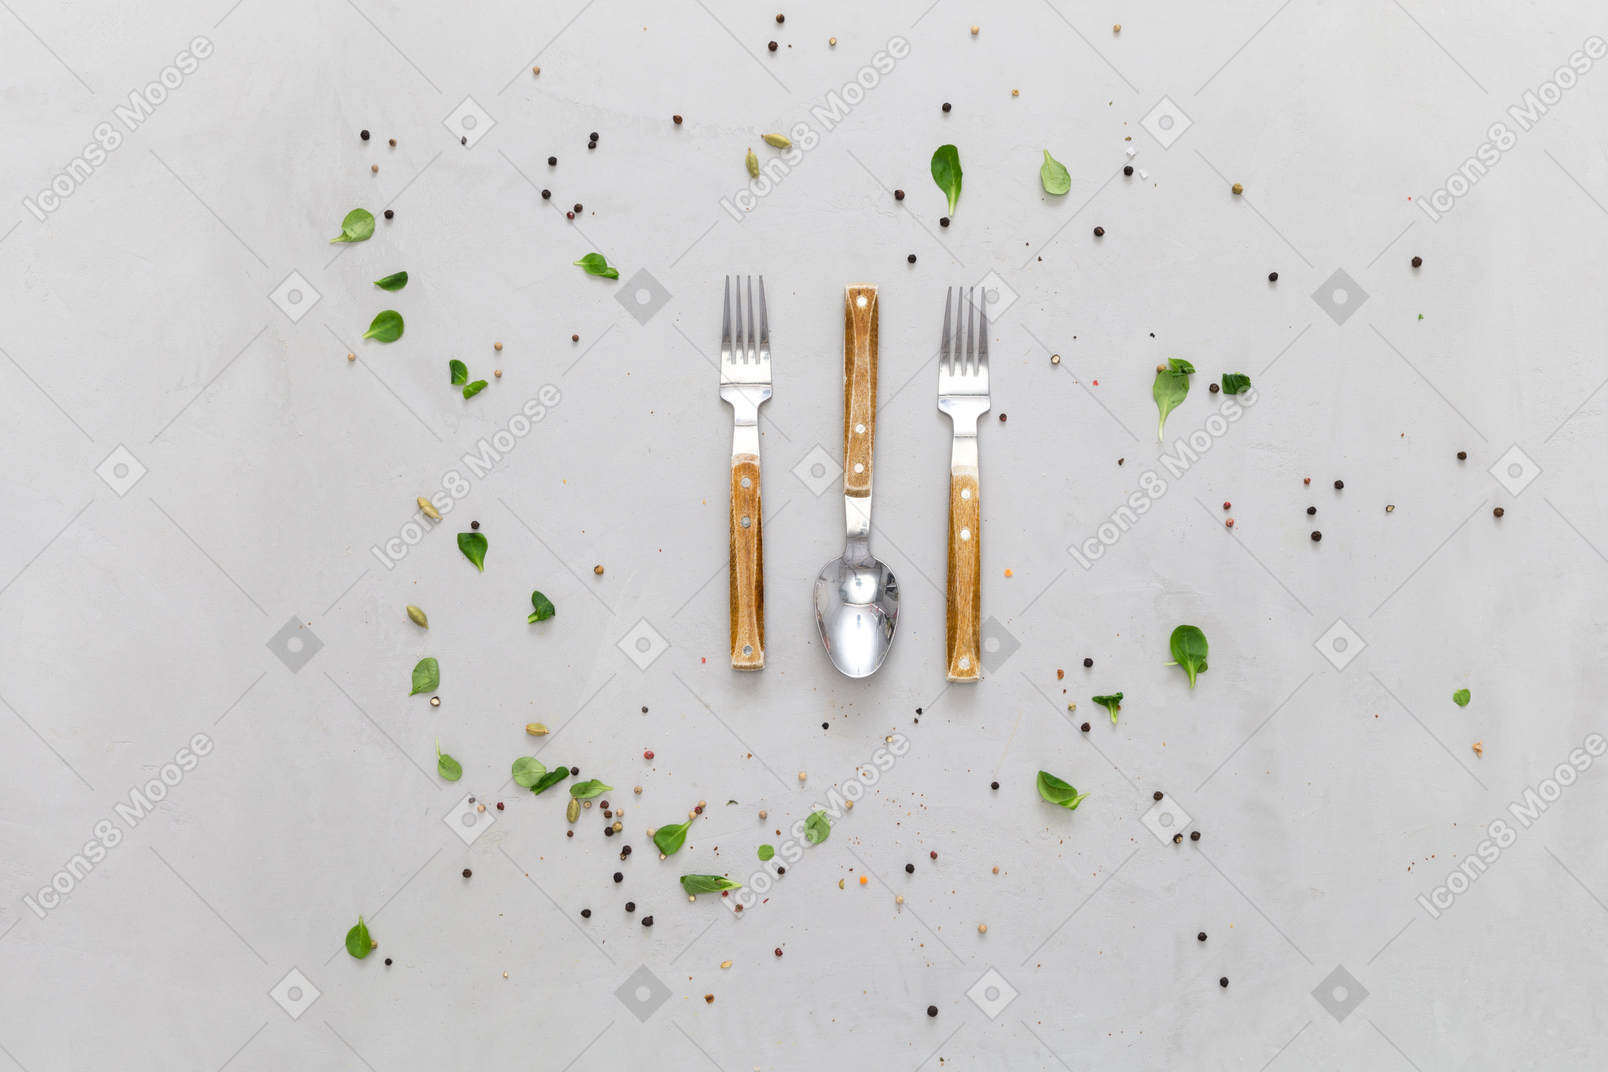 Forks and spoon with wooden handles